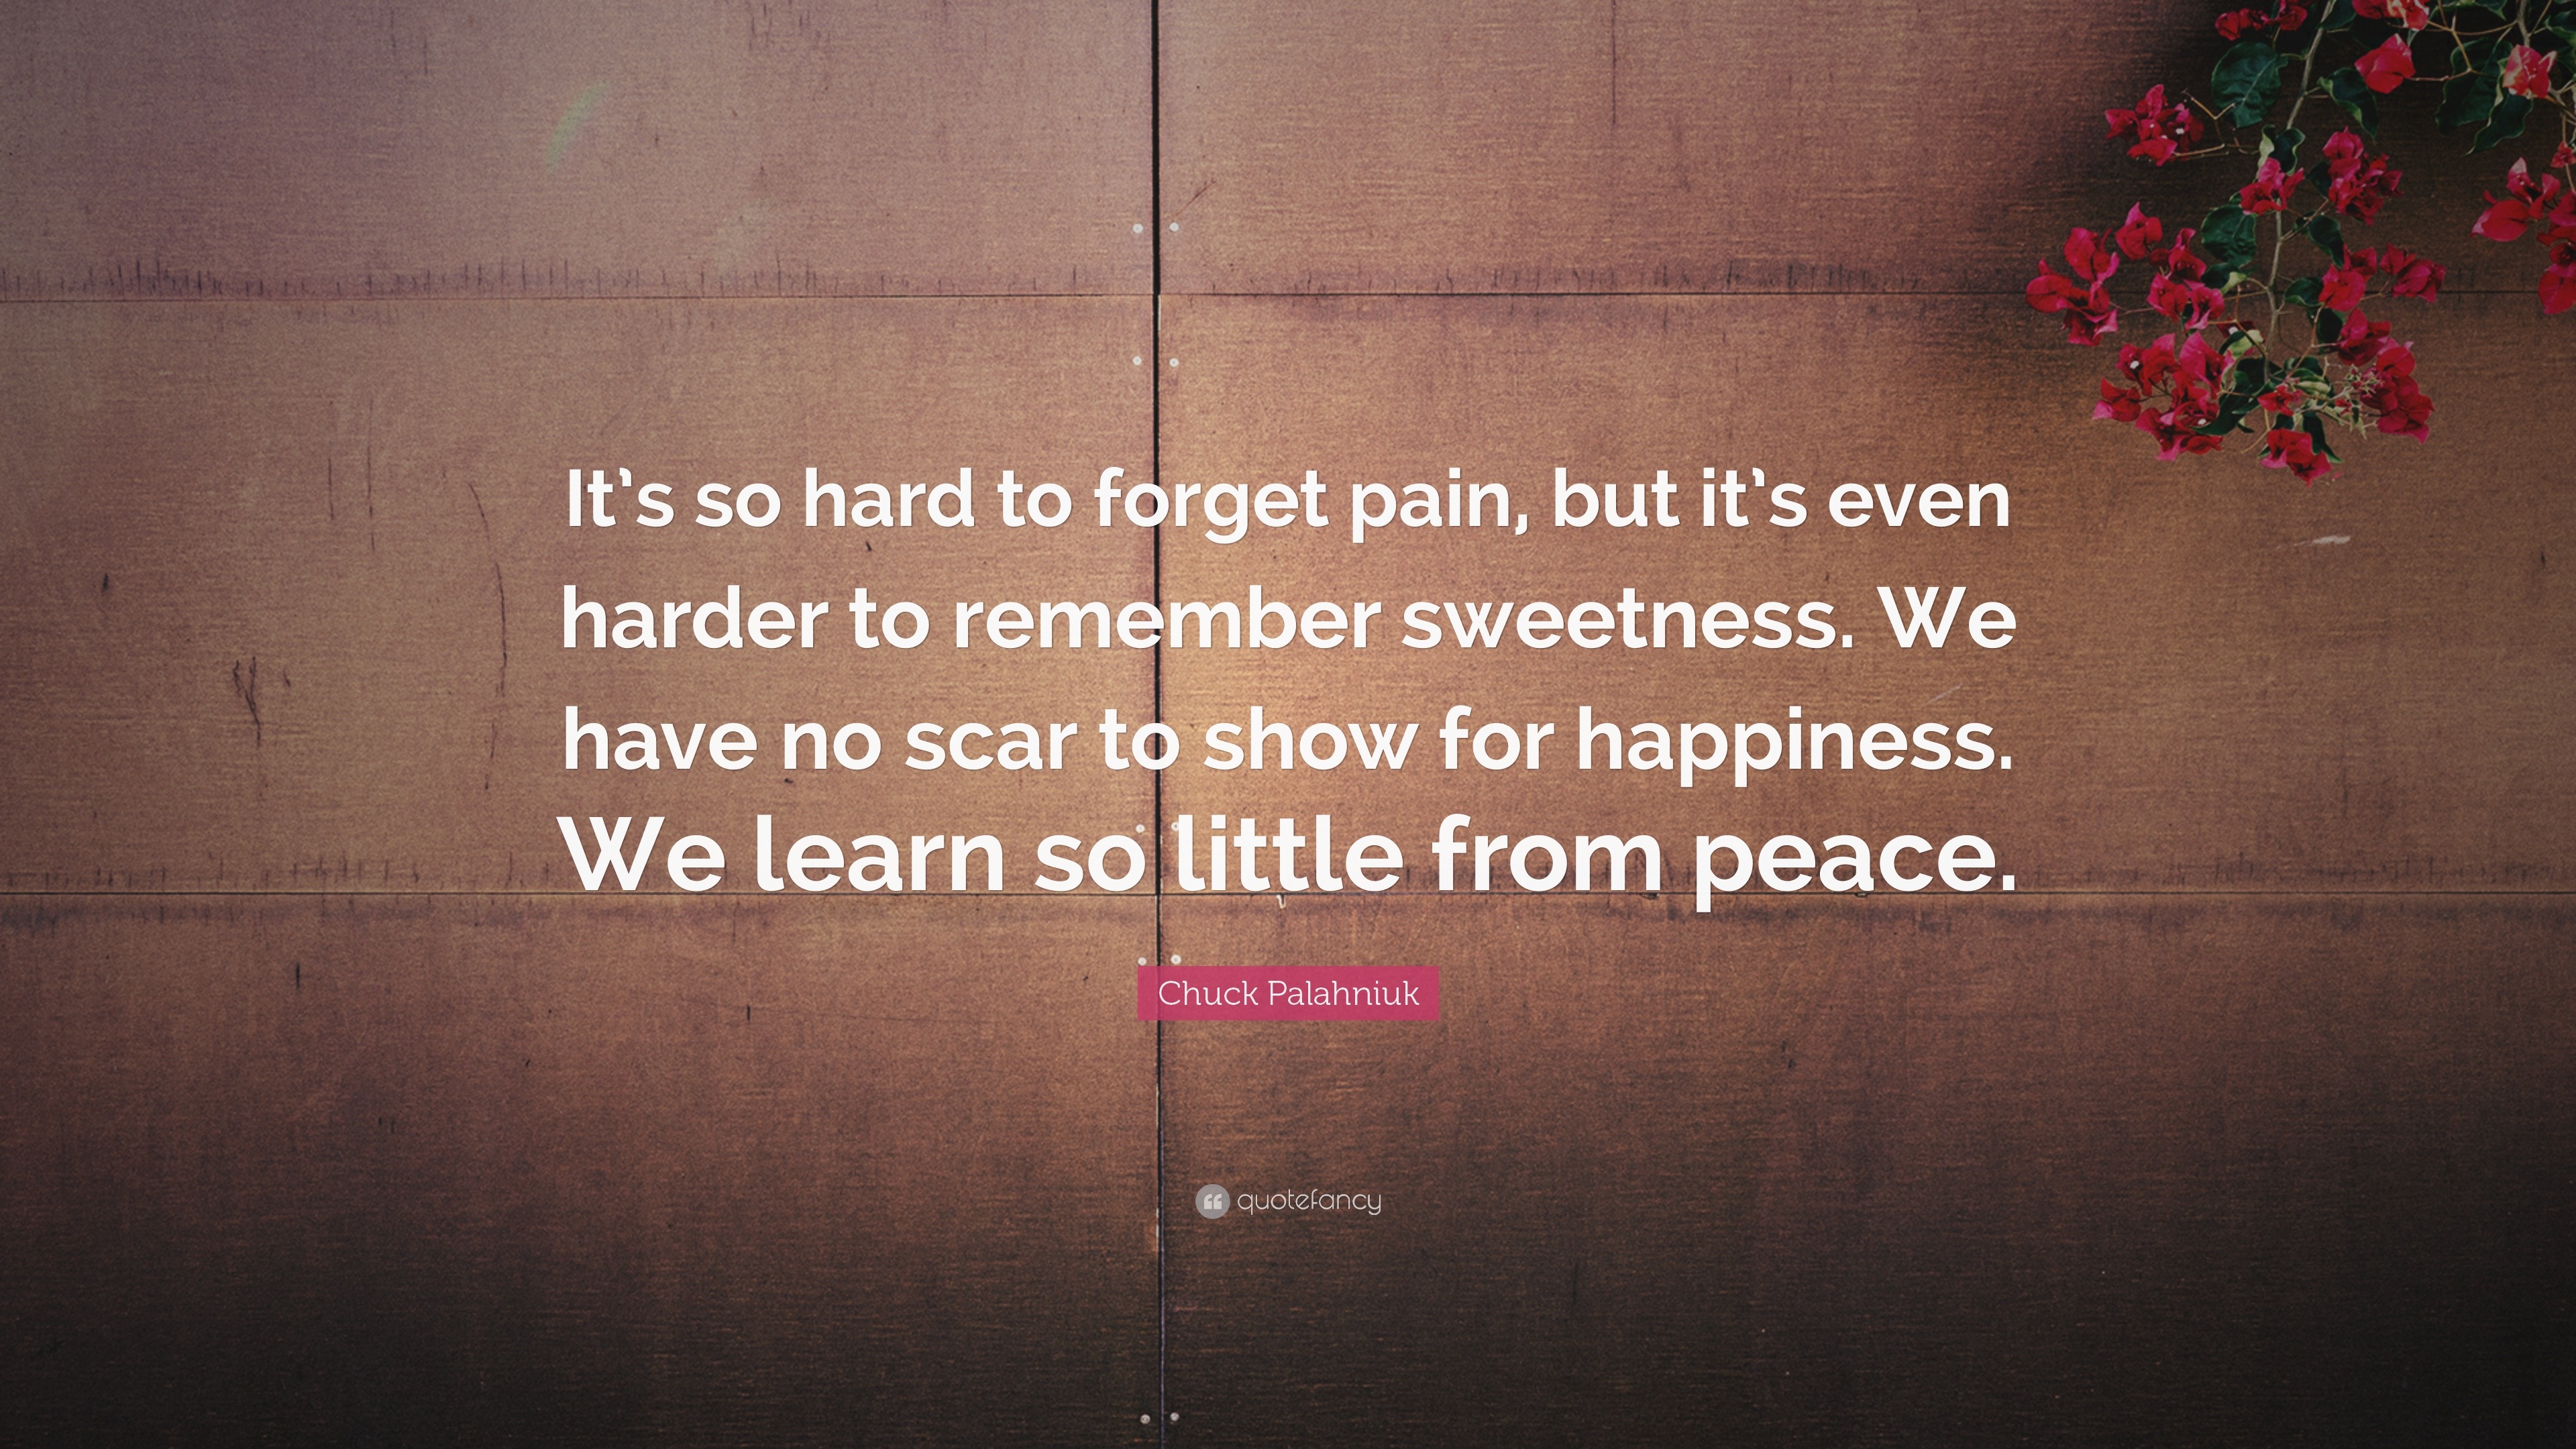 Happiness Quotes “It s so hard to for pain but it s even harder to